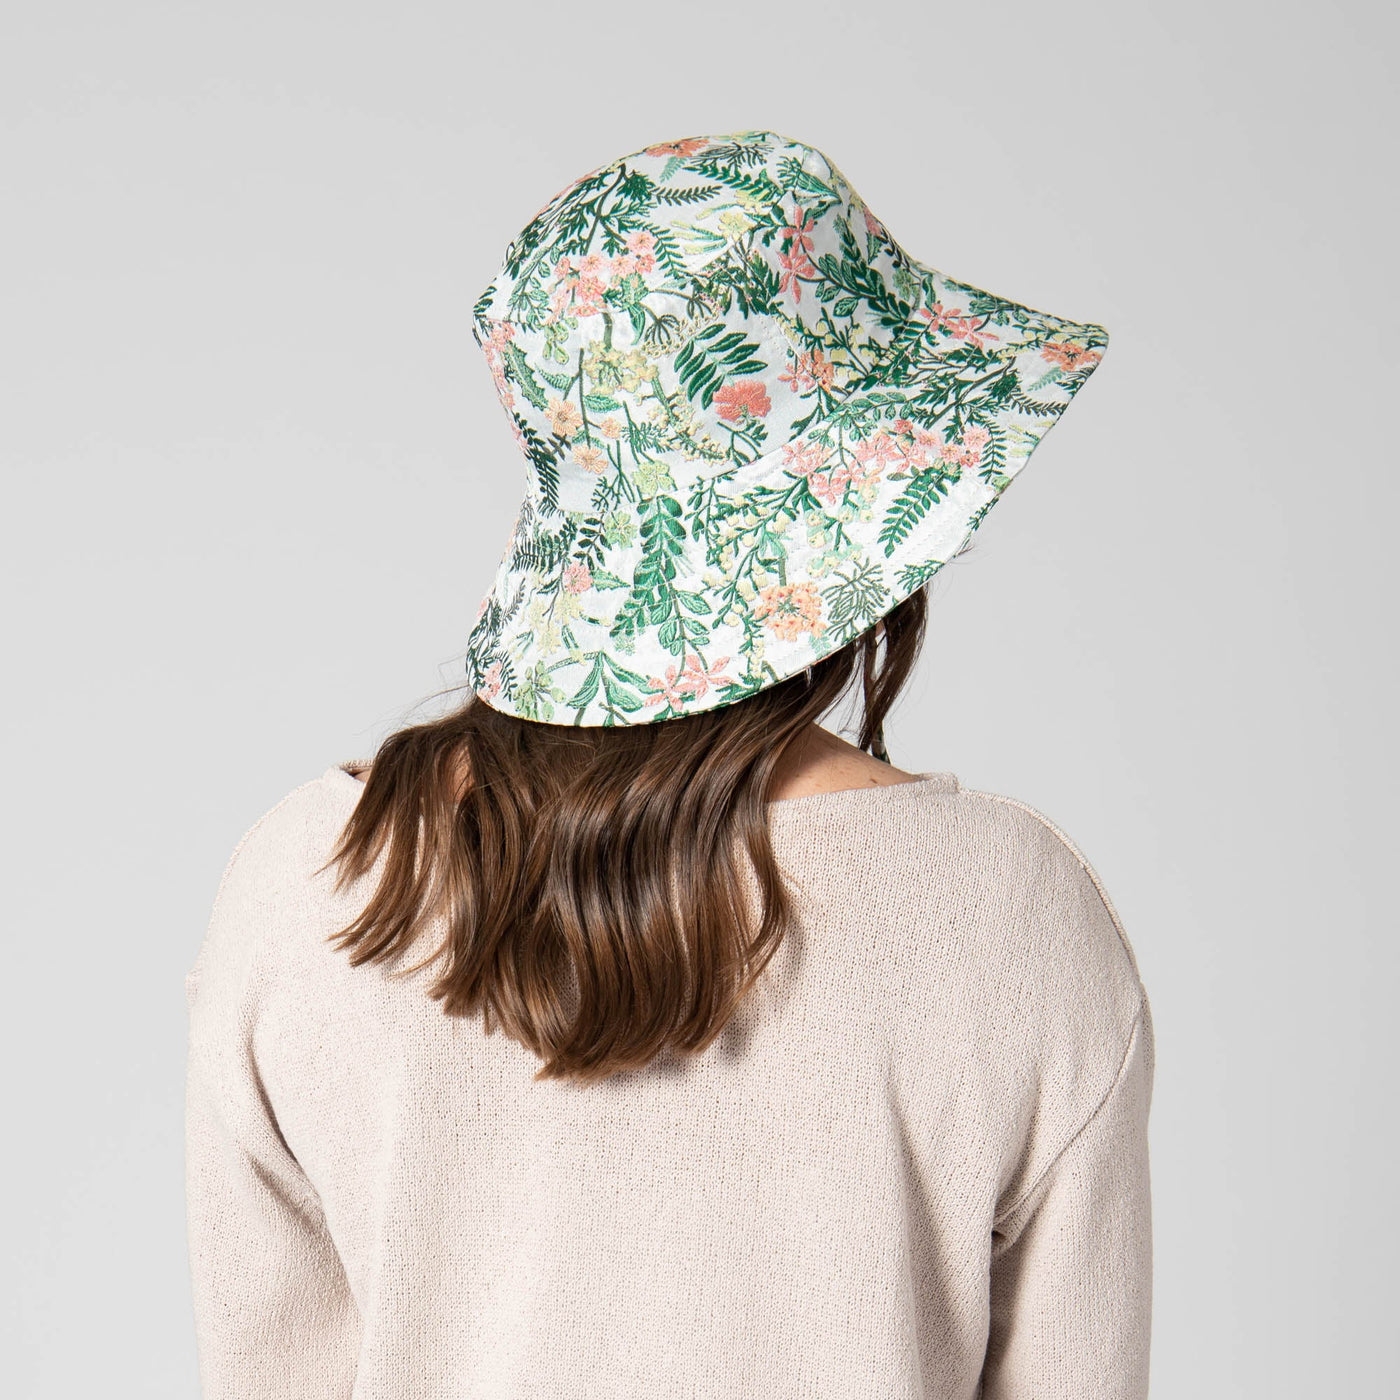 BUCKET - Colony Palms - Floral Printed Bucket Hat With Ties